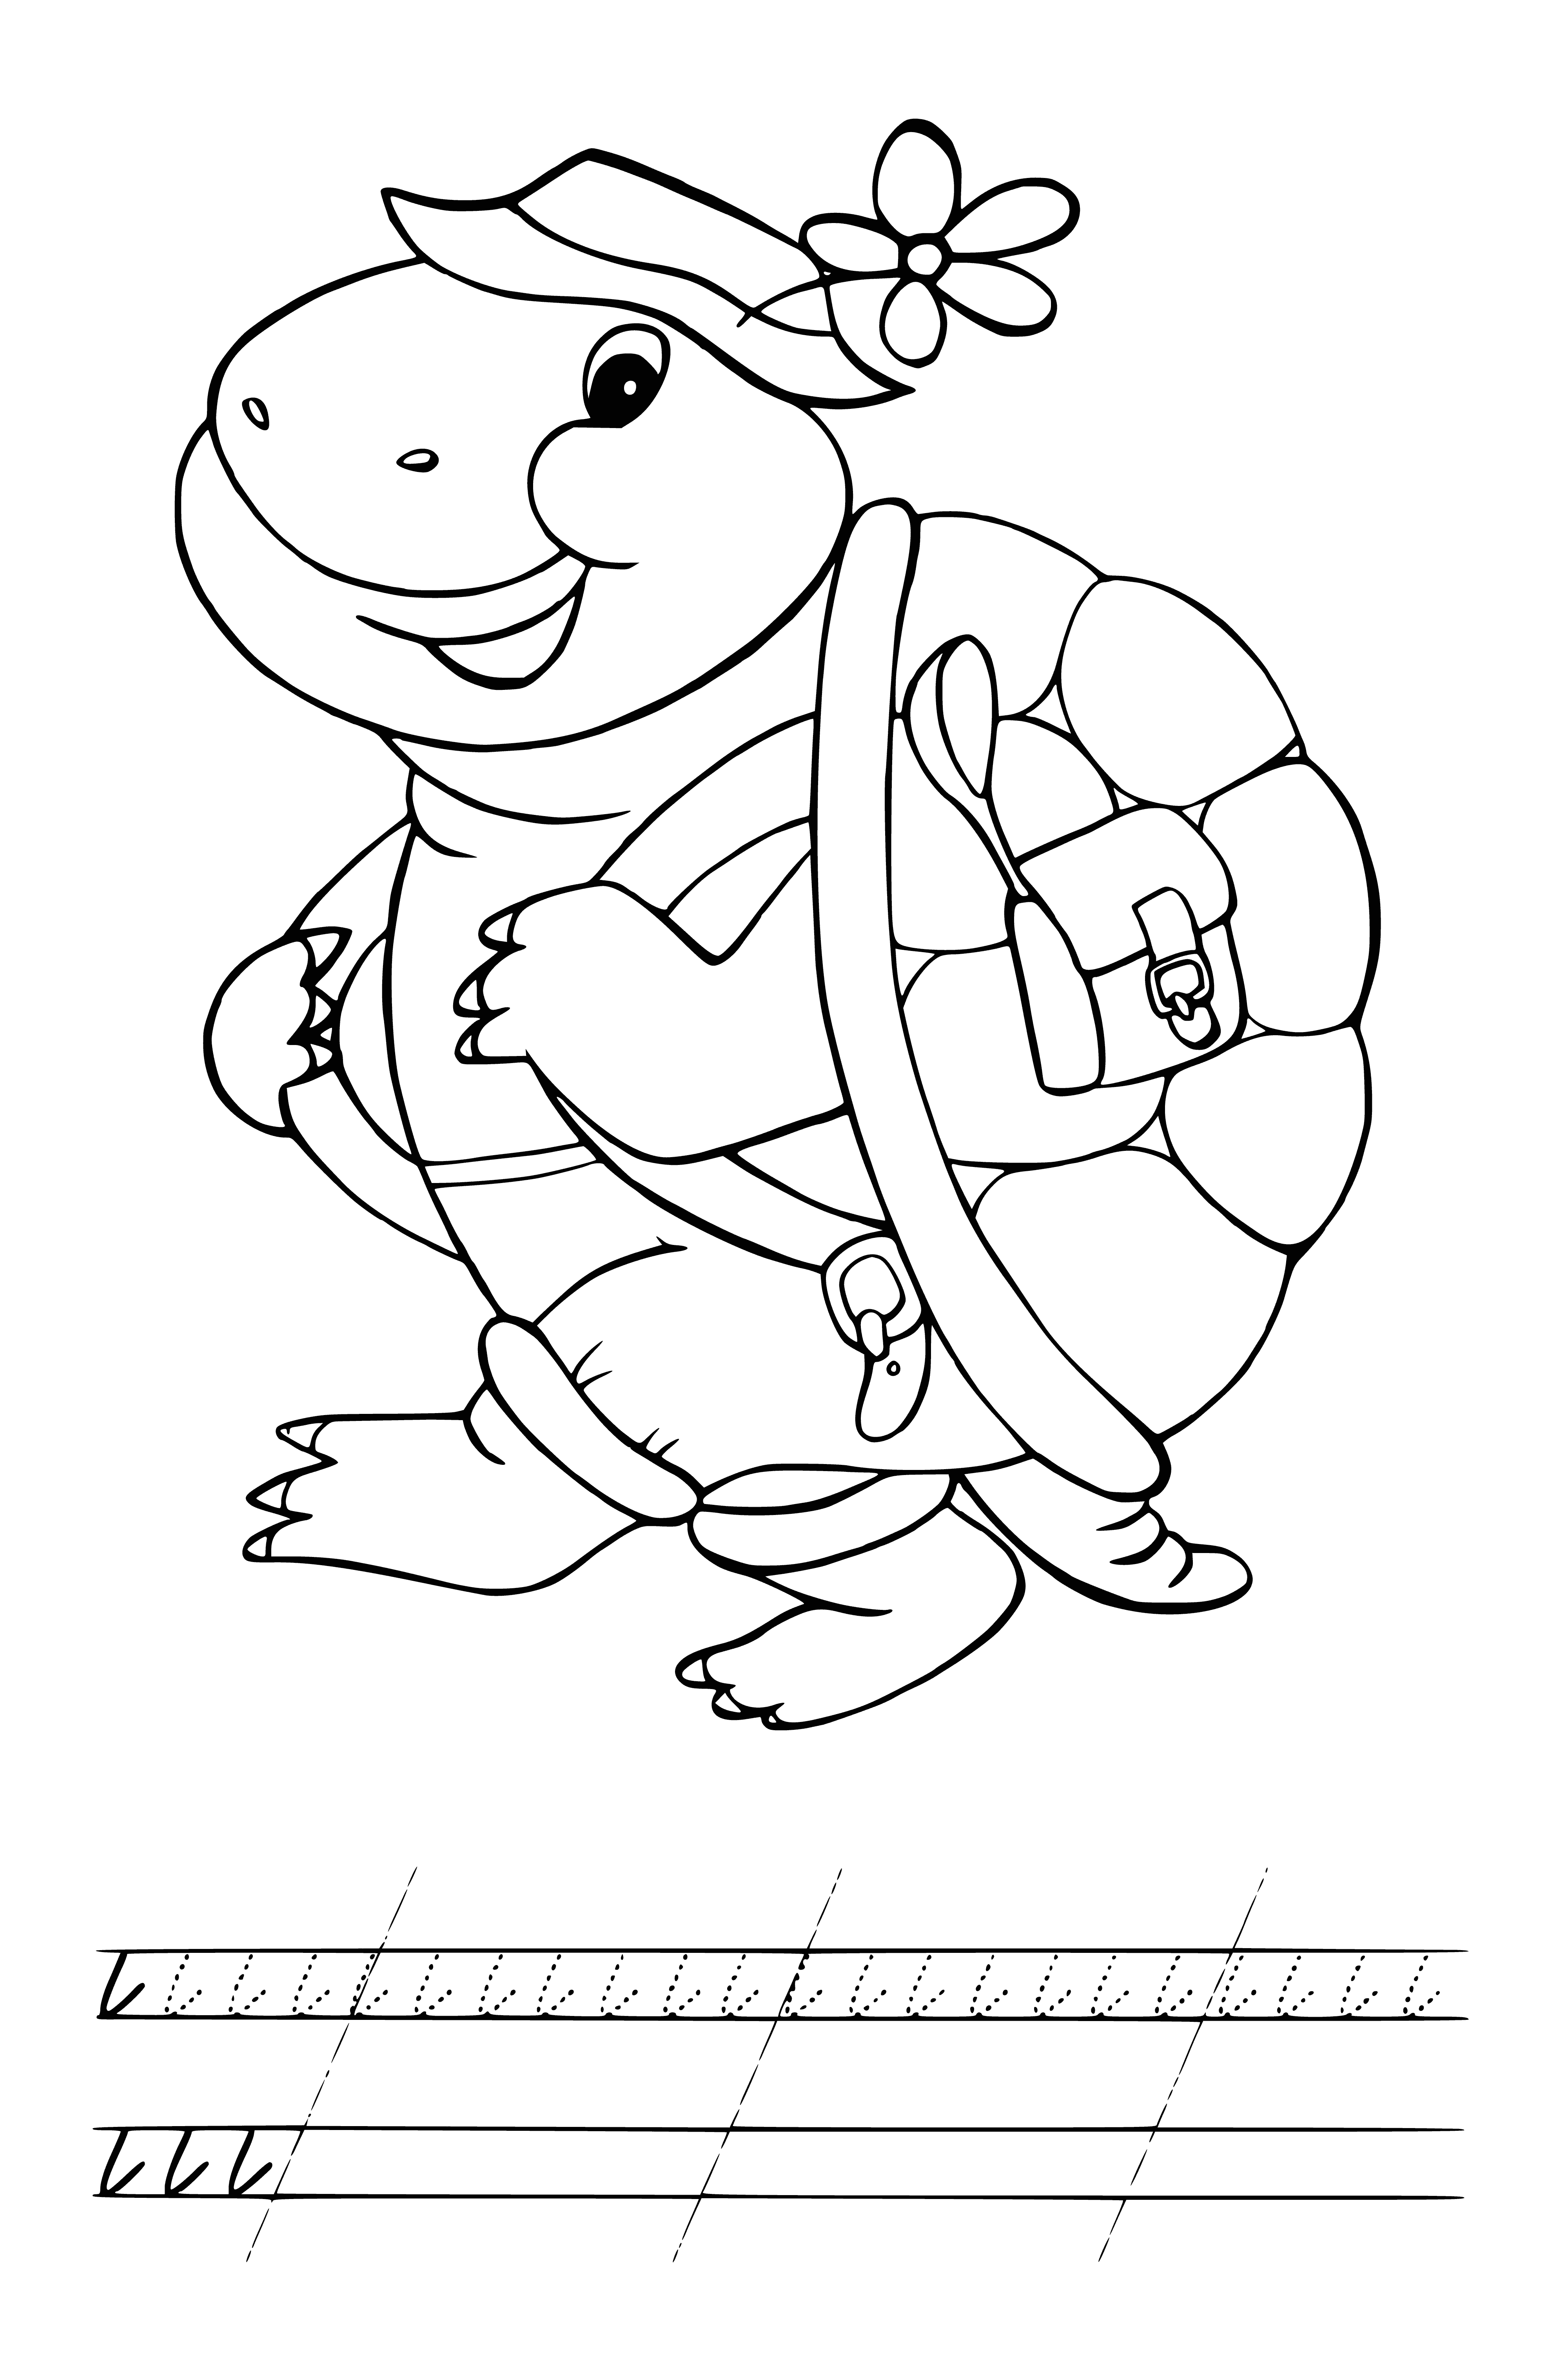 coloring page: Turtle is a reptile with a shell, head, flippers, and dark brown or green color. It is an aquatic animal. #turtle #animals